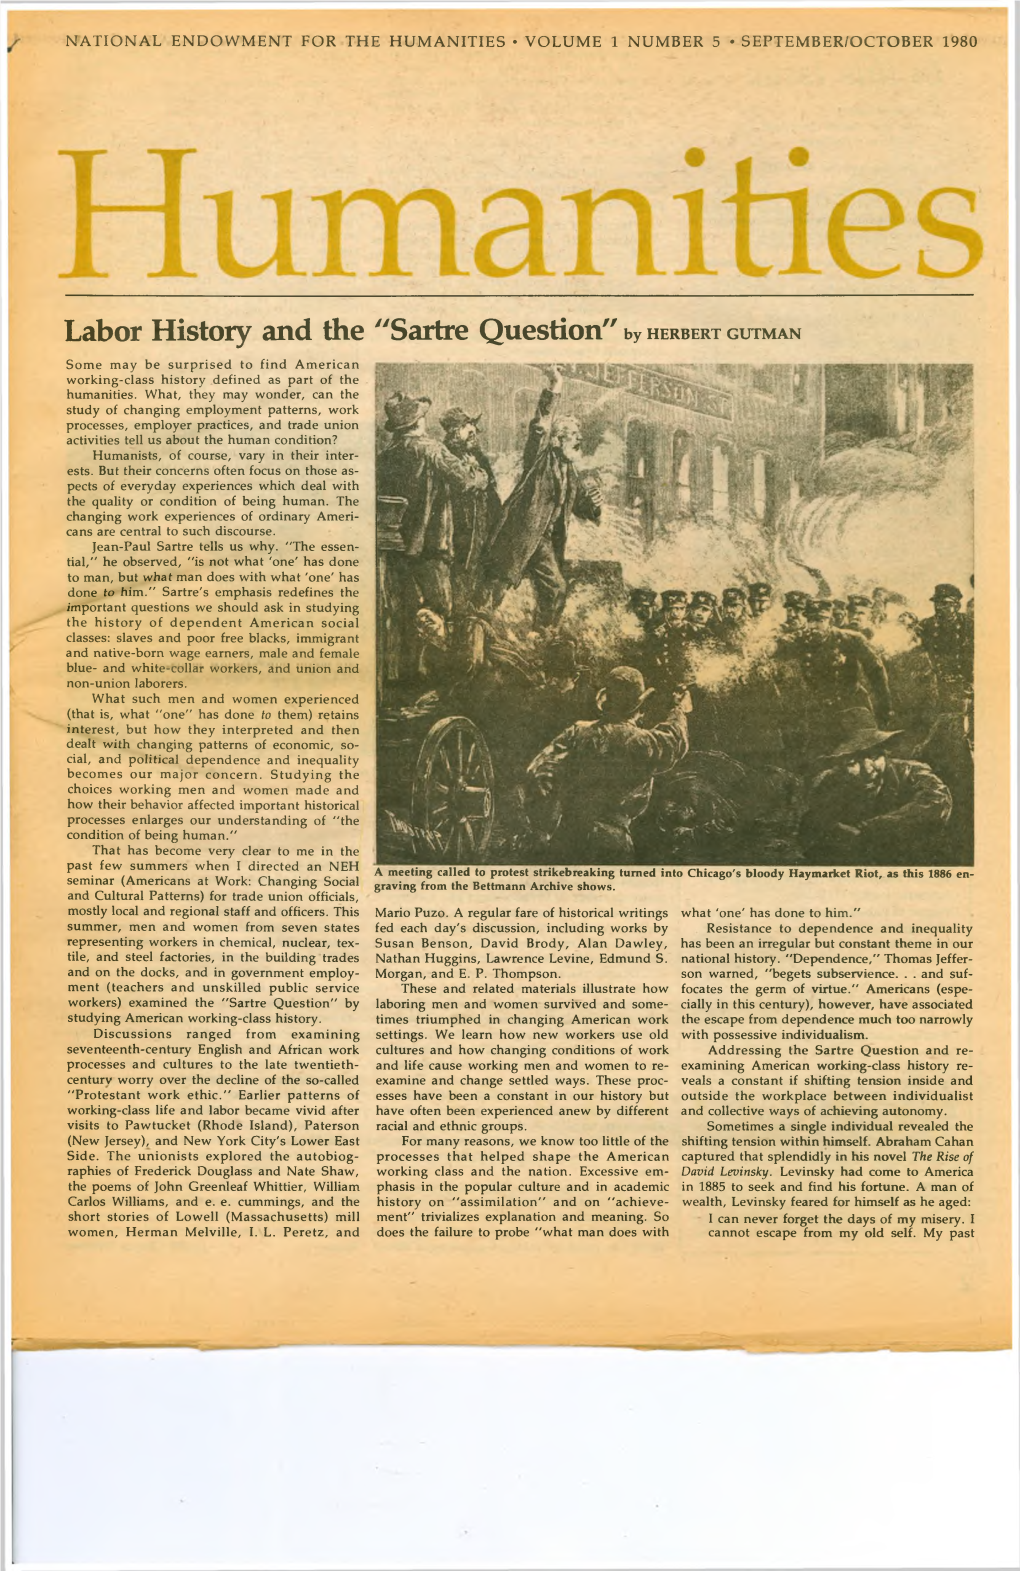 Labor History and the "Sartre Question'' by Herbert Gutman